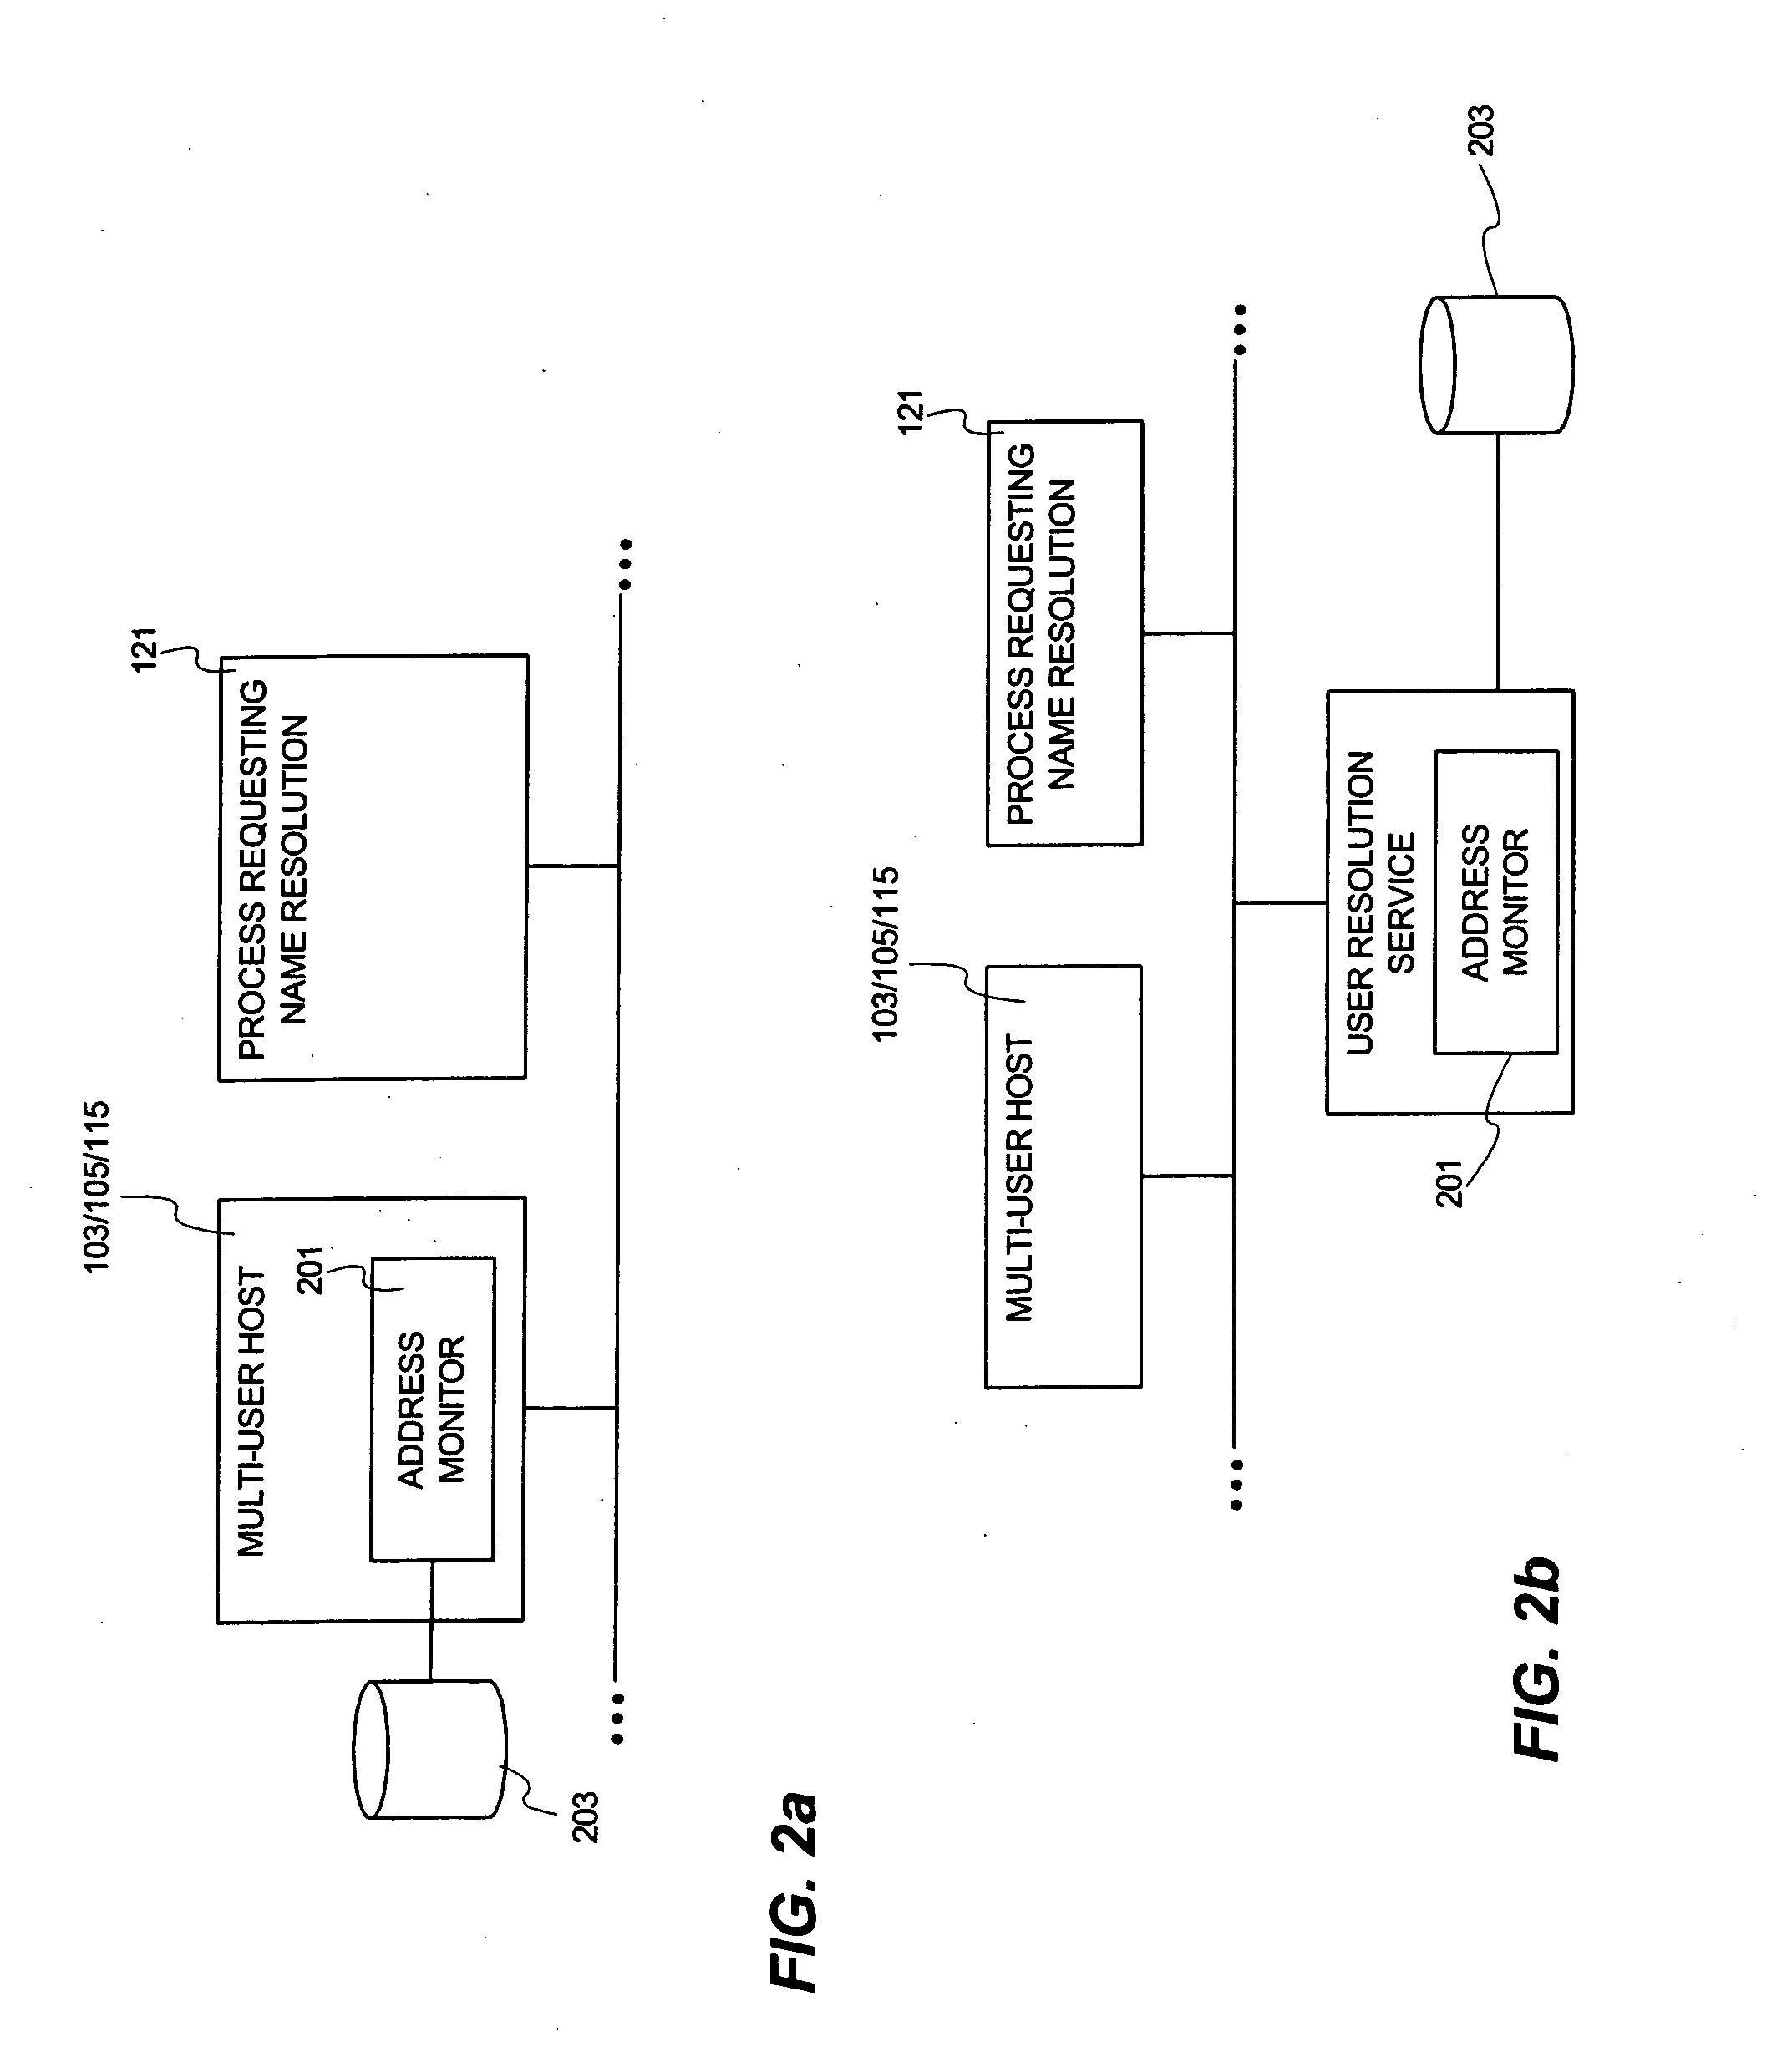 Systems and methods for network user resolution